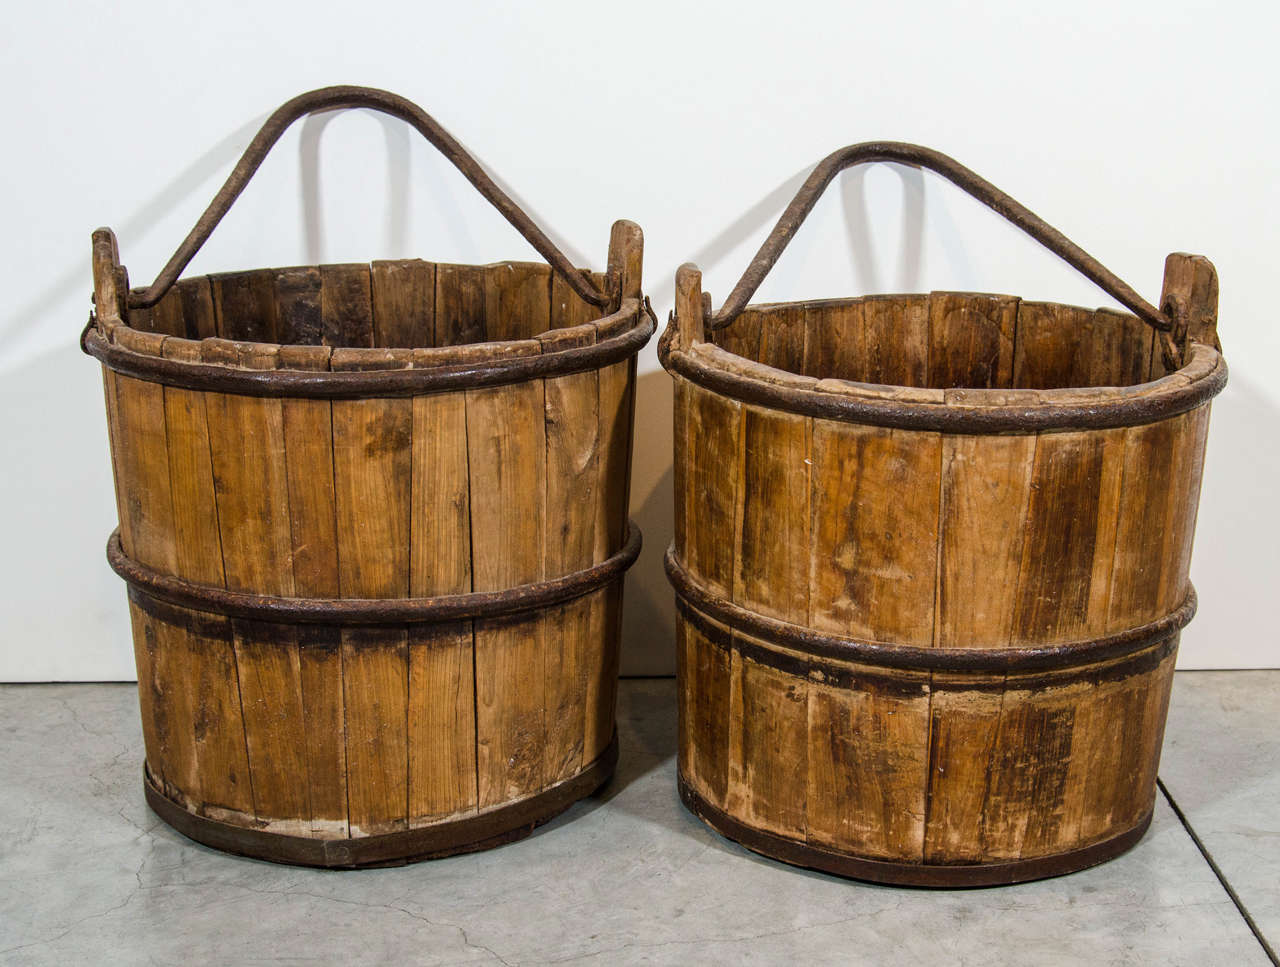 Two Chinese cypress water buckets with striking cast iron handles and straps.Nicely worn.  Priced individually.
From Shandong Province, c. 1920. 
BT377